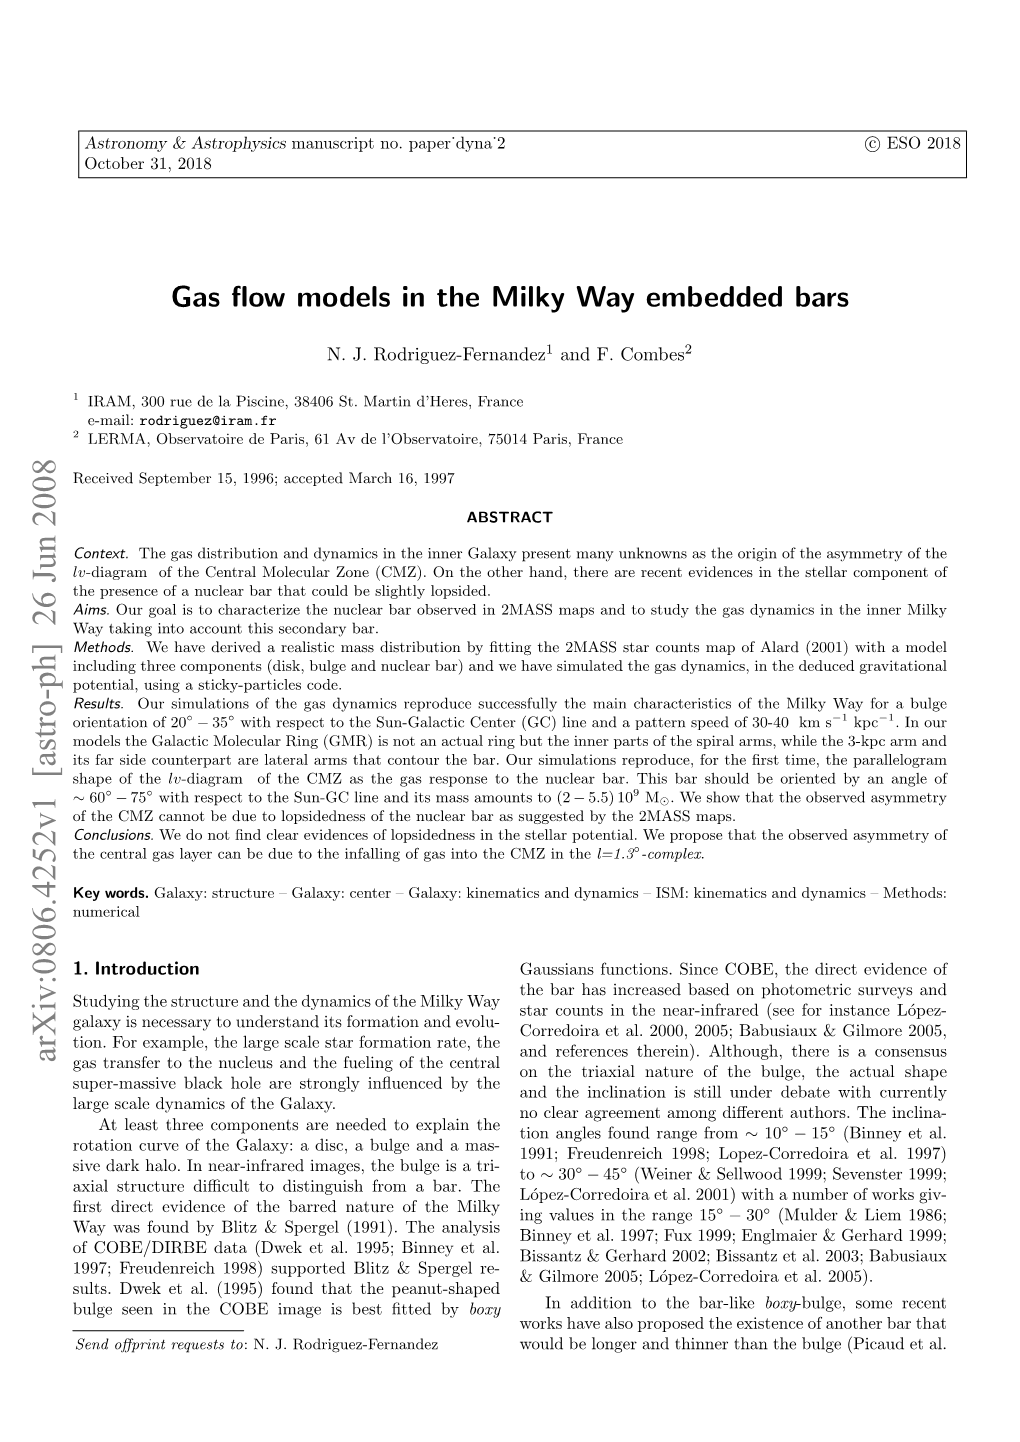 Gas Flow Models in the Milky Way Embedded Bars